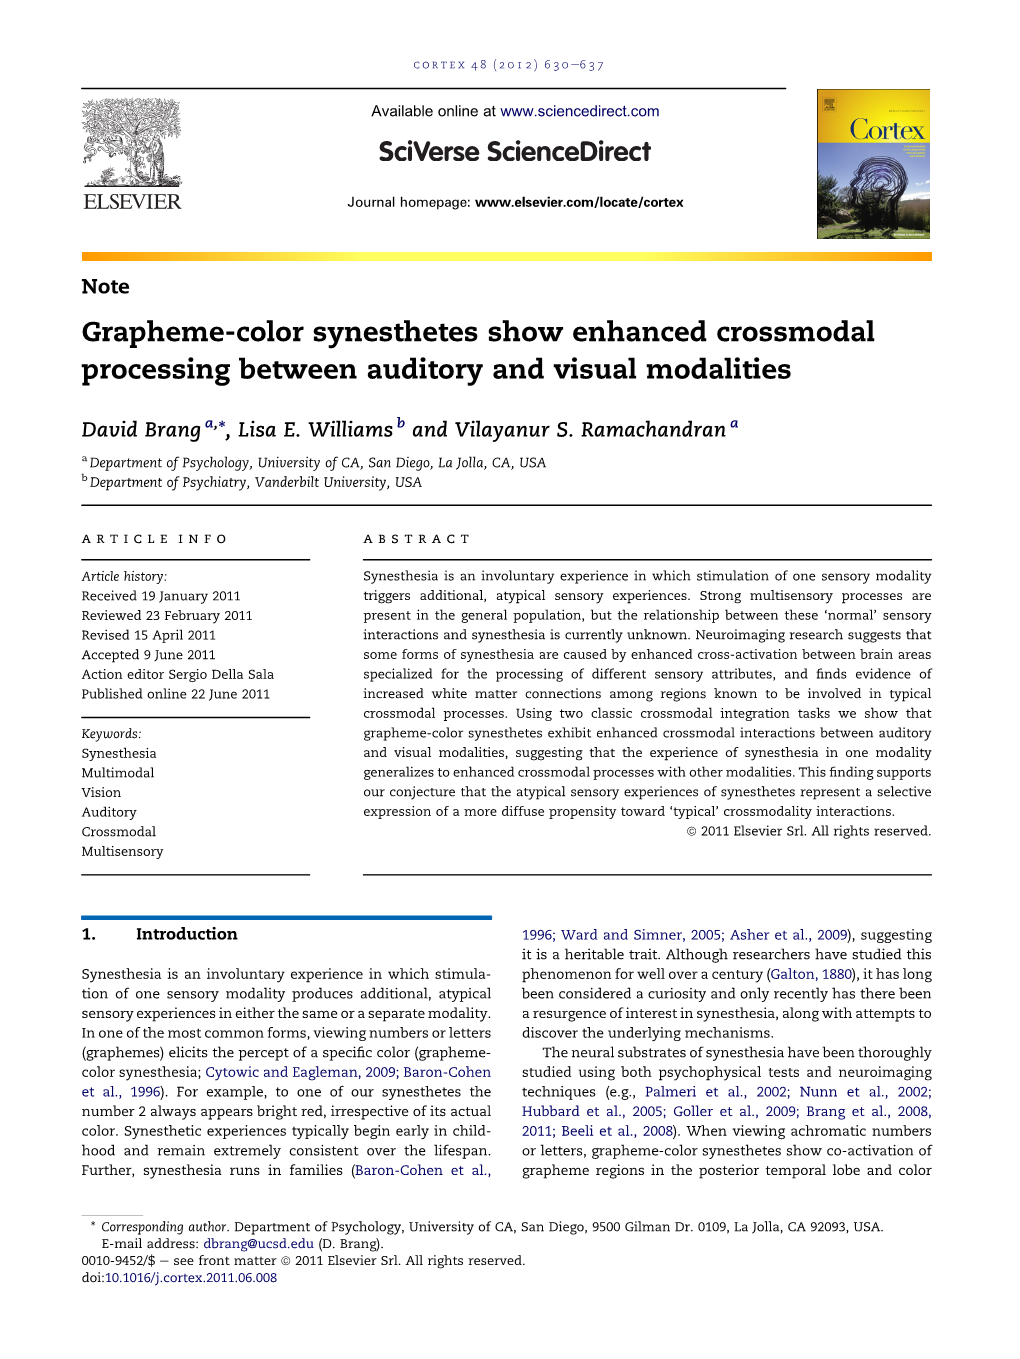 Grapheme-Color Synesthetes Show Enhanced Crossmodal Processing Between Auditory and Visual Modalities